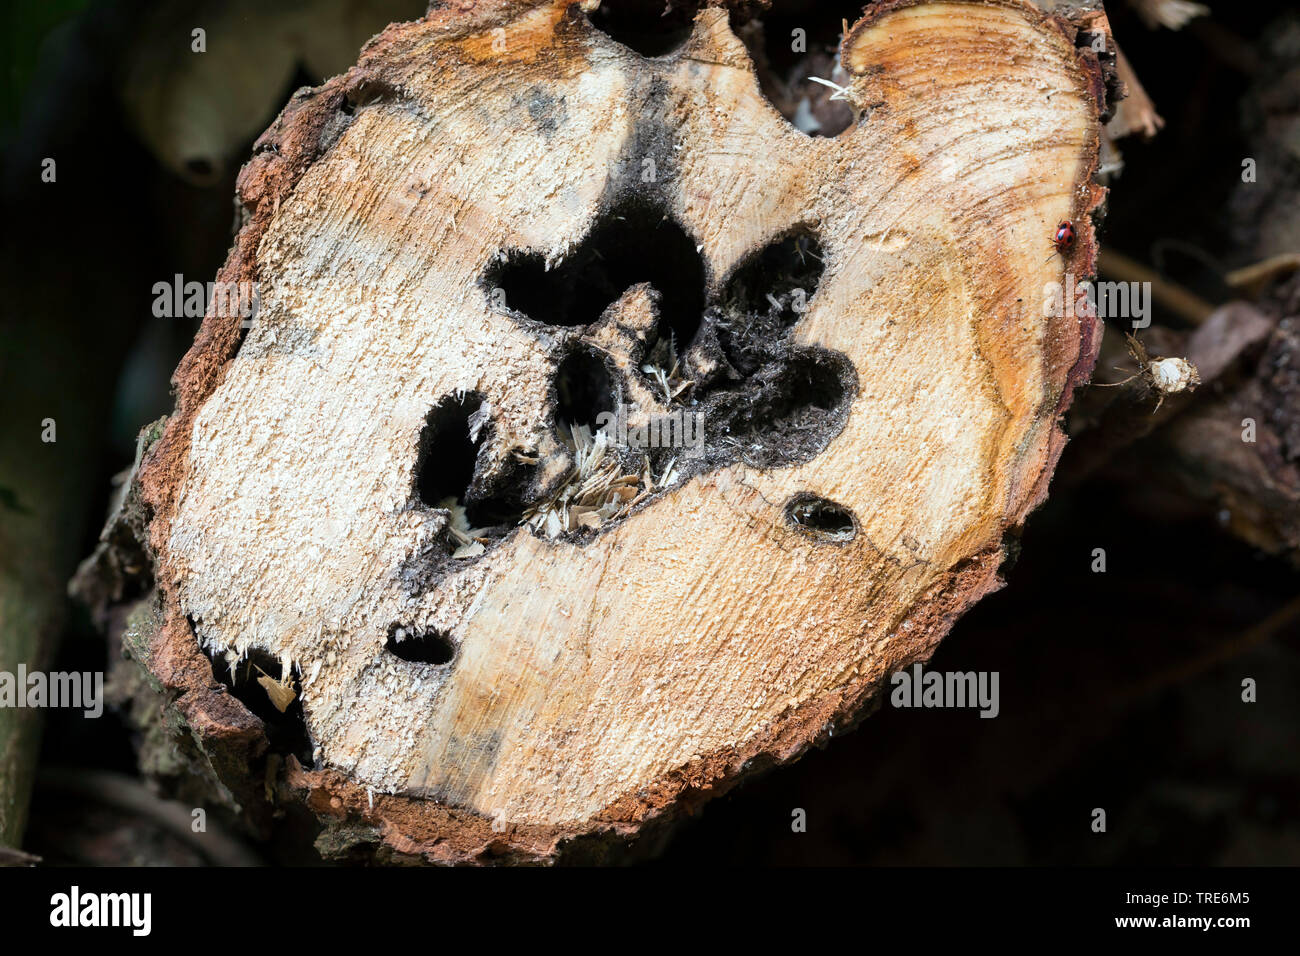 Goat Moth (Cossus cossus), burrow of the wood eating caterpillar in a willow log, Germany Stock Photo